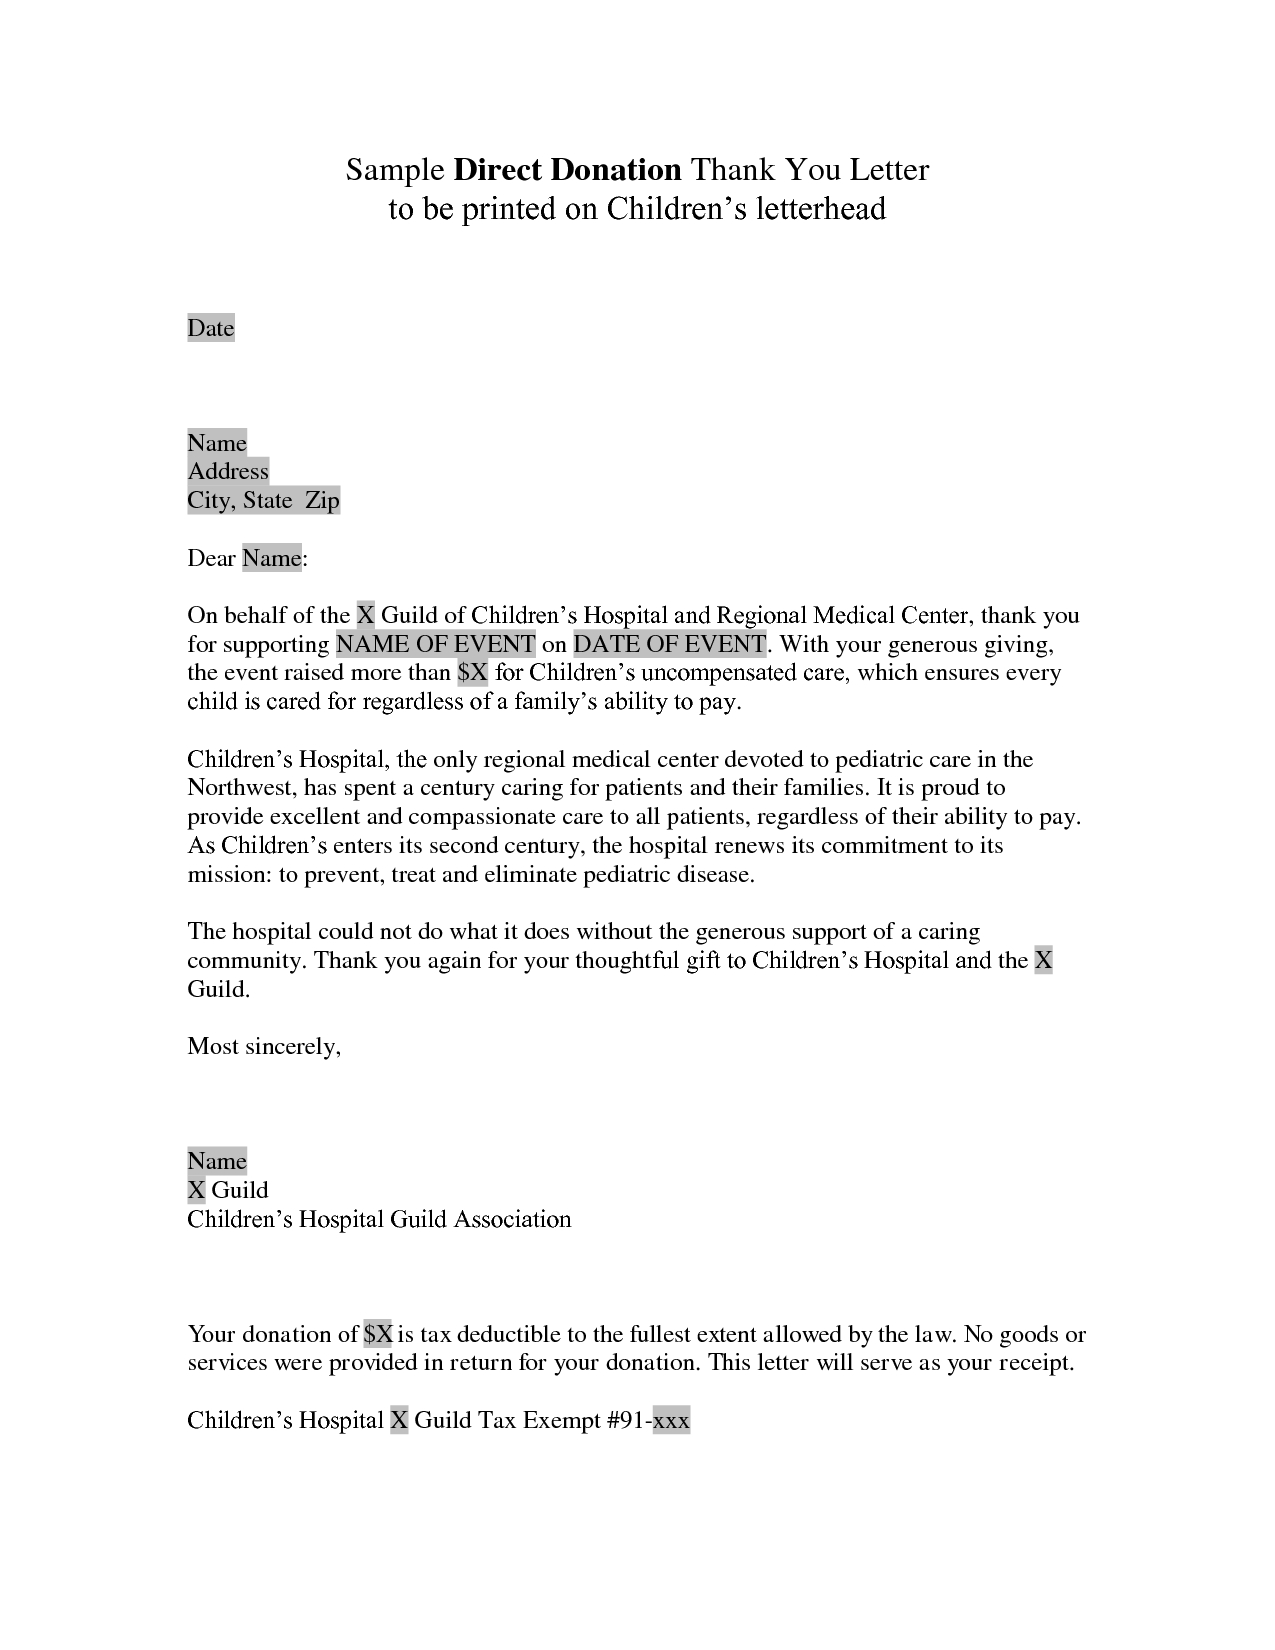 Tax Write Off Donation Letter Template - Donor Thank You Letter Sample